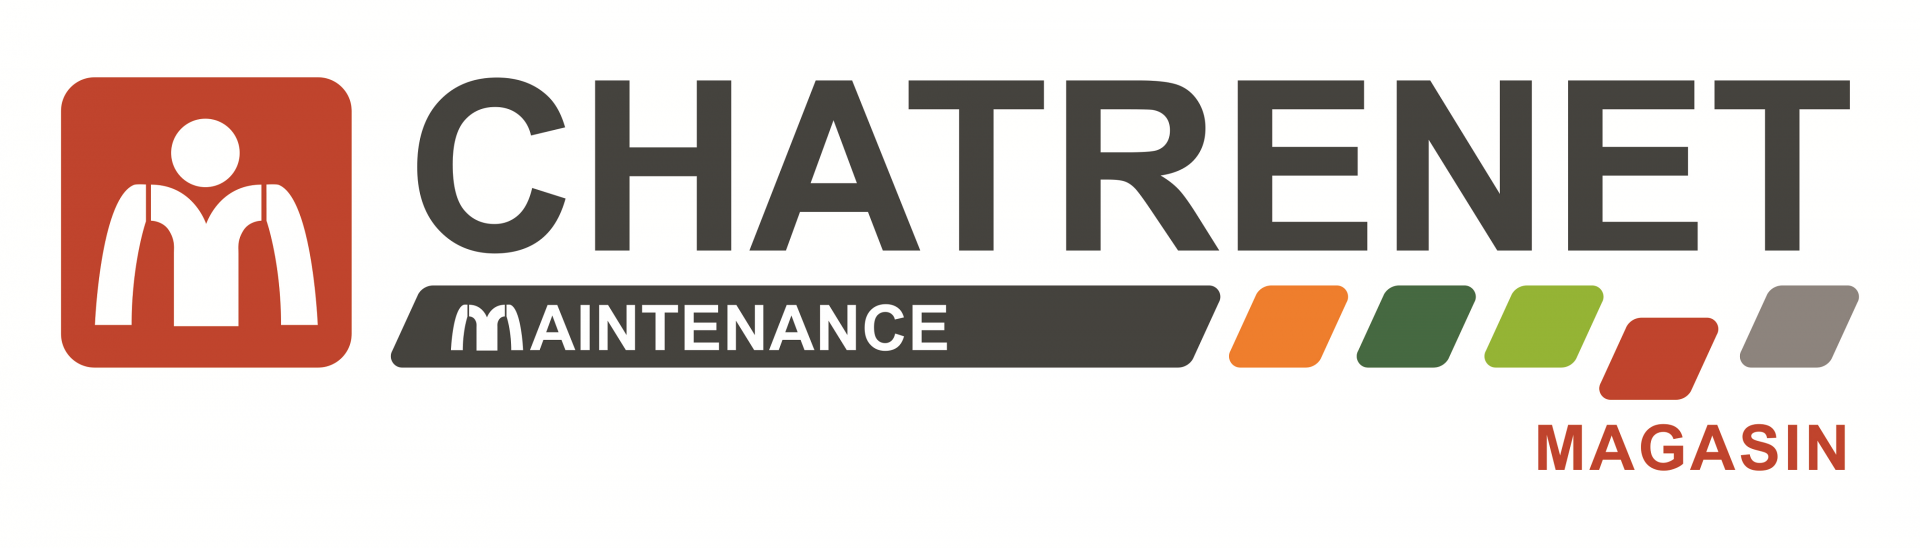 Chatrenet logo 2023 magasin site